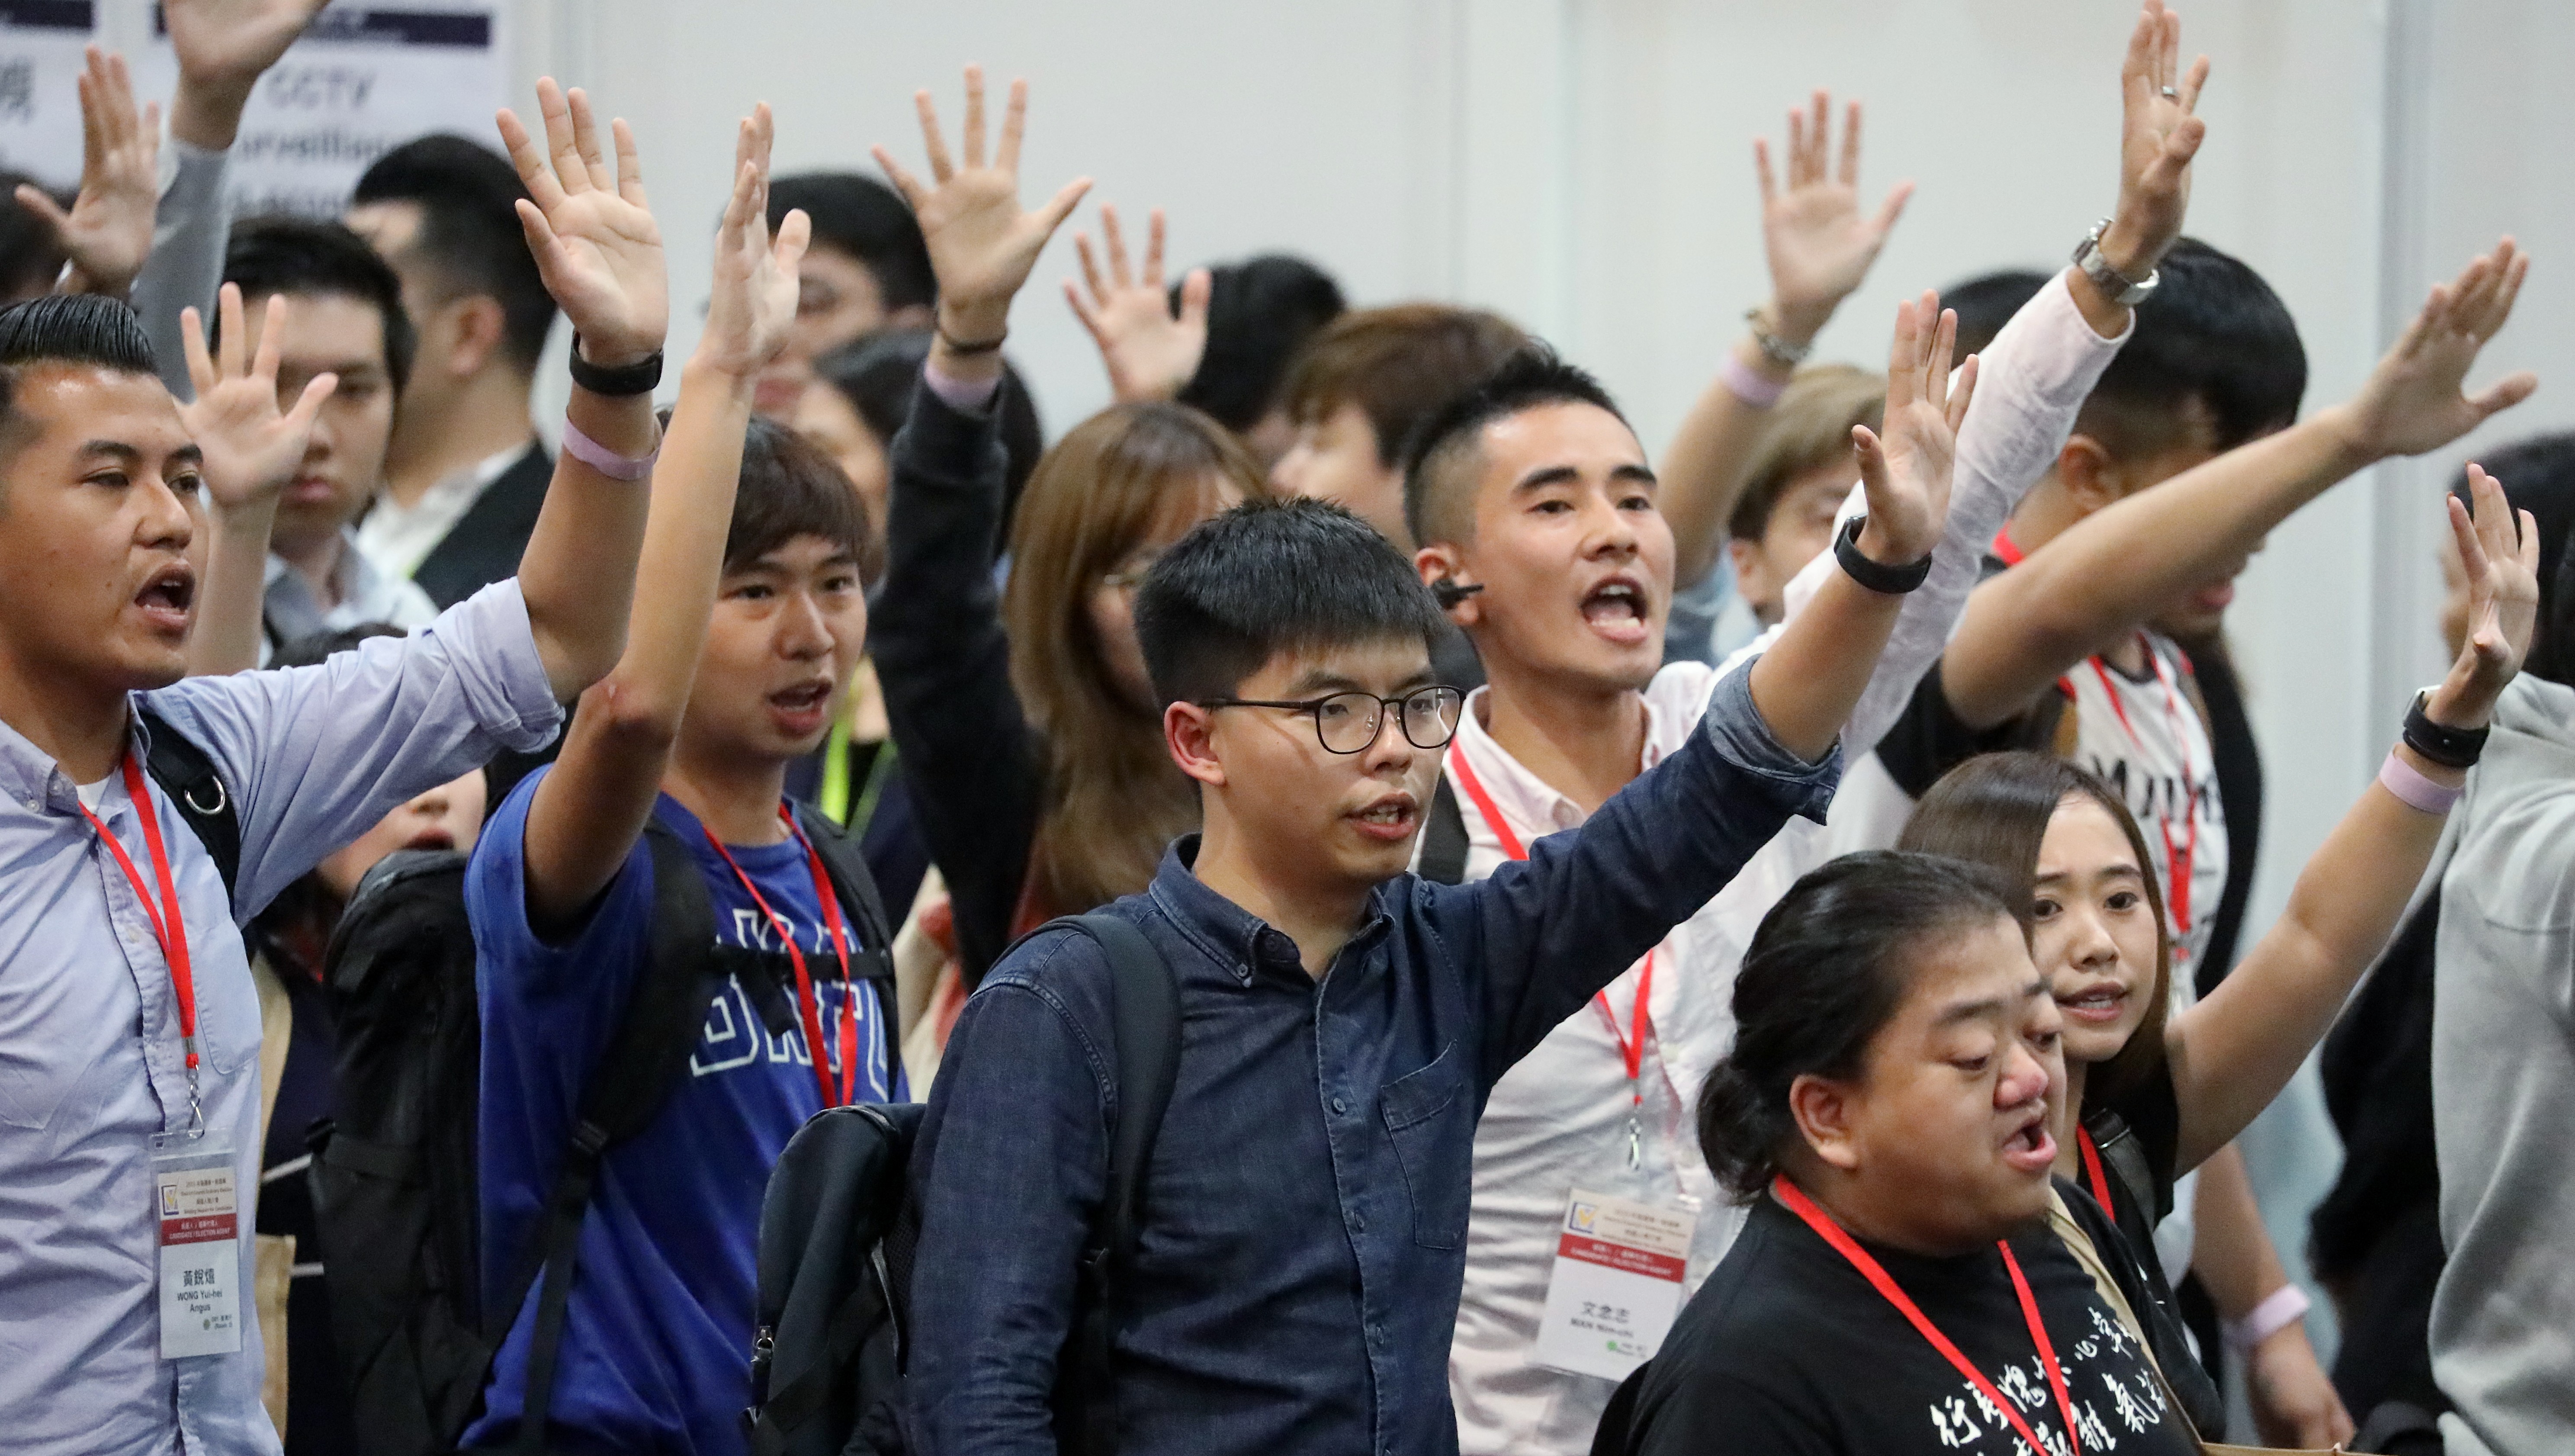 Activist Joshua Wong Chi-fung (centre) holds up five fingers to represent the five demands of anti-government protesters, at a briefing session for the district council elections, hosted by the Electoral Affairs Commission at AsiaWorld-Expo in Chek Lap Kok on October 24. Wong’s application to run was rejected a few days later. Photo: K.Y. Cheng